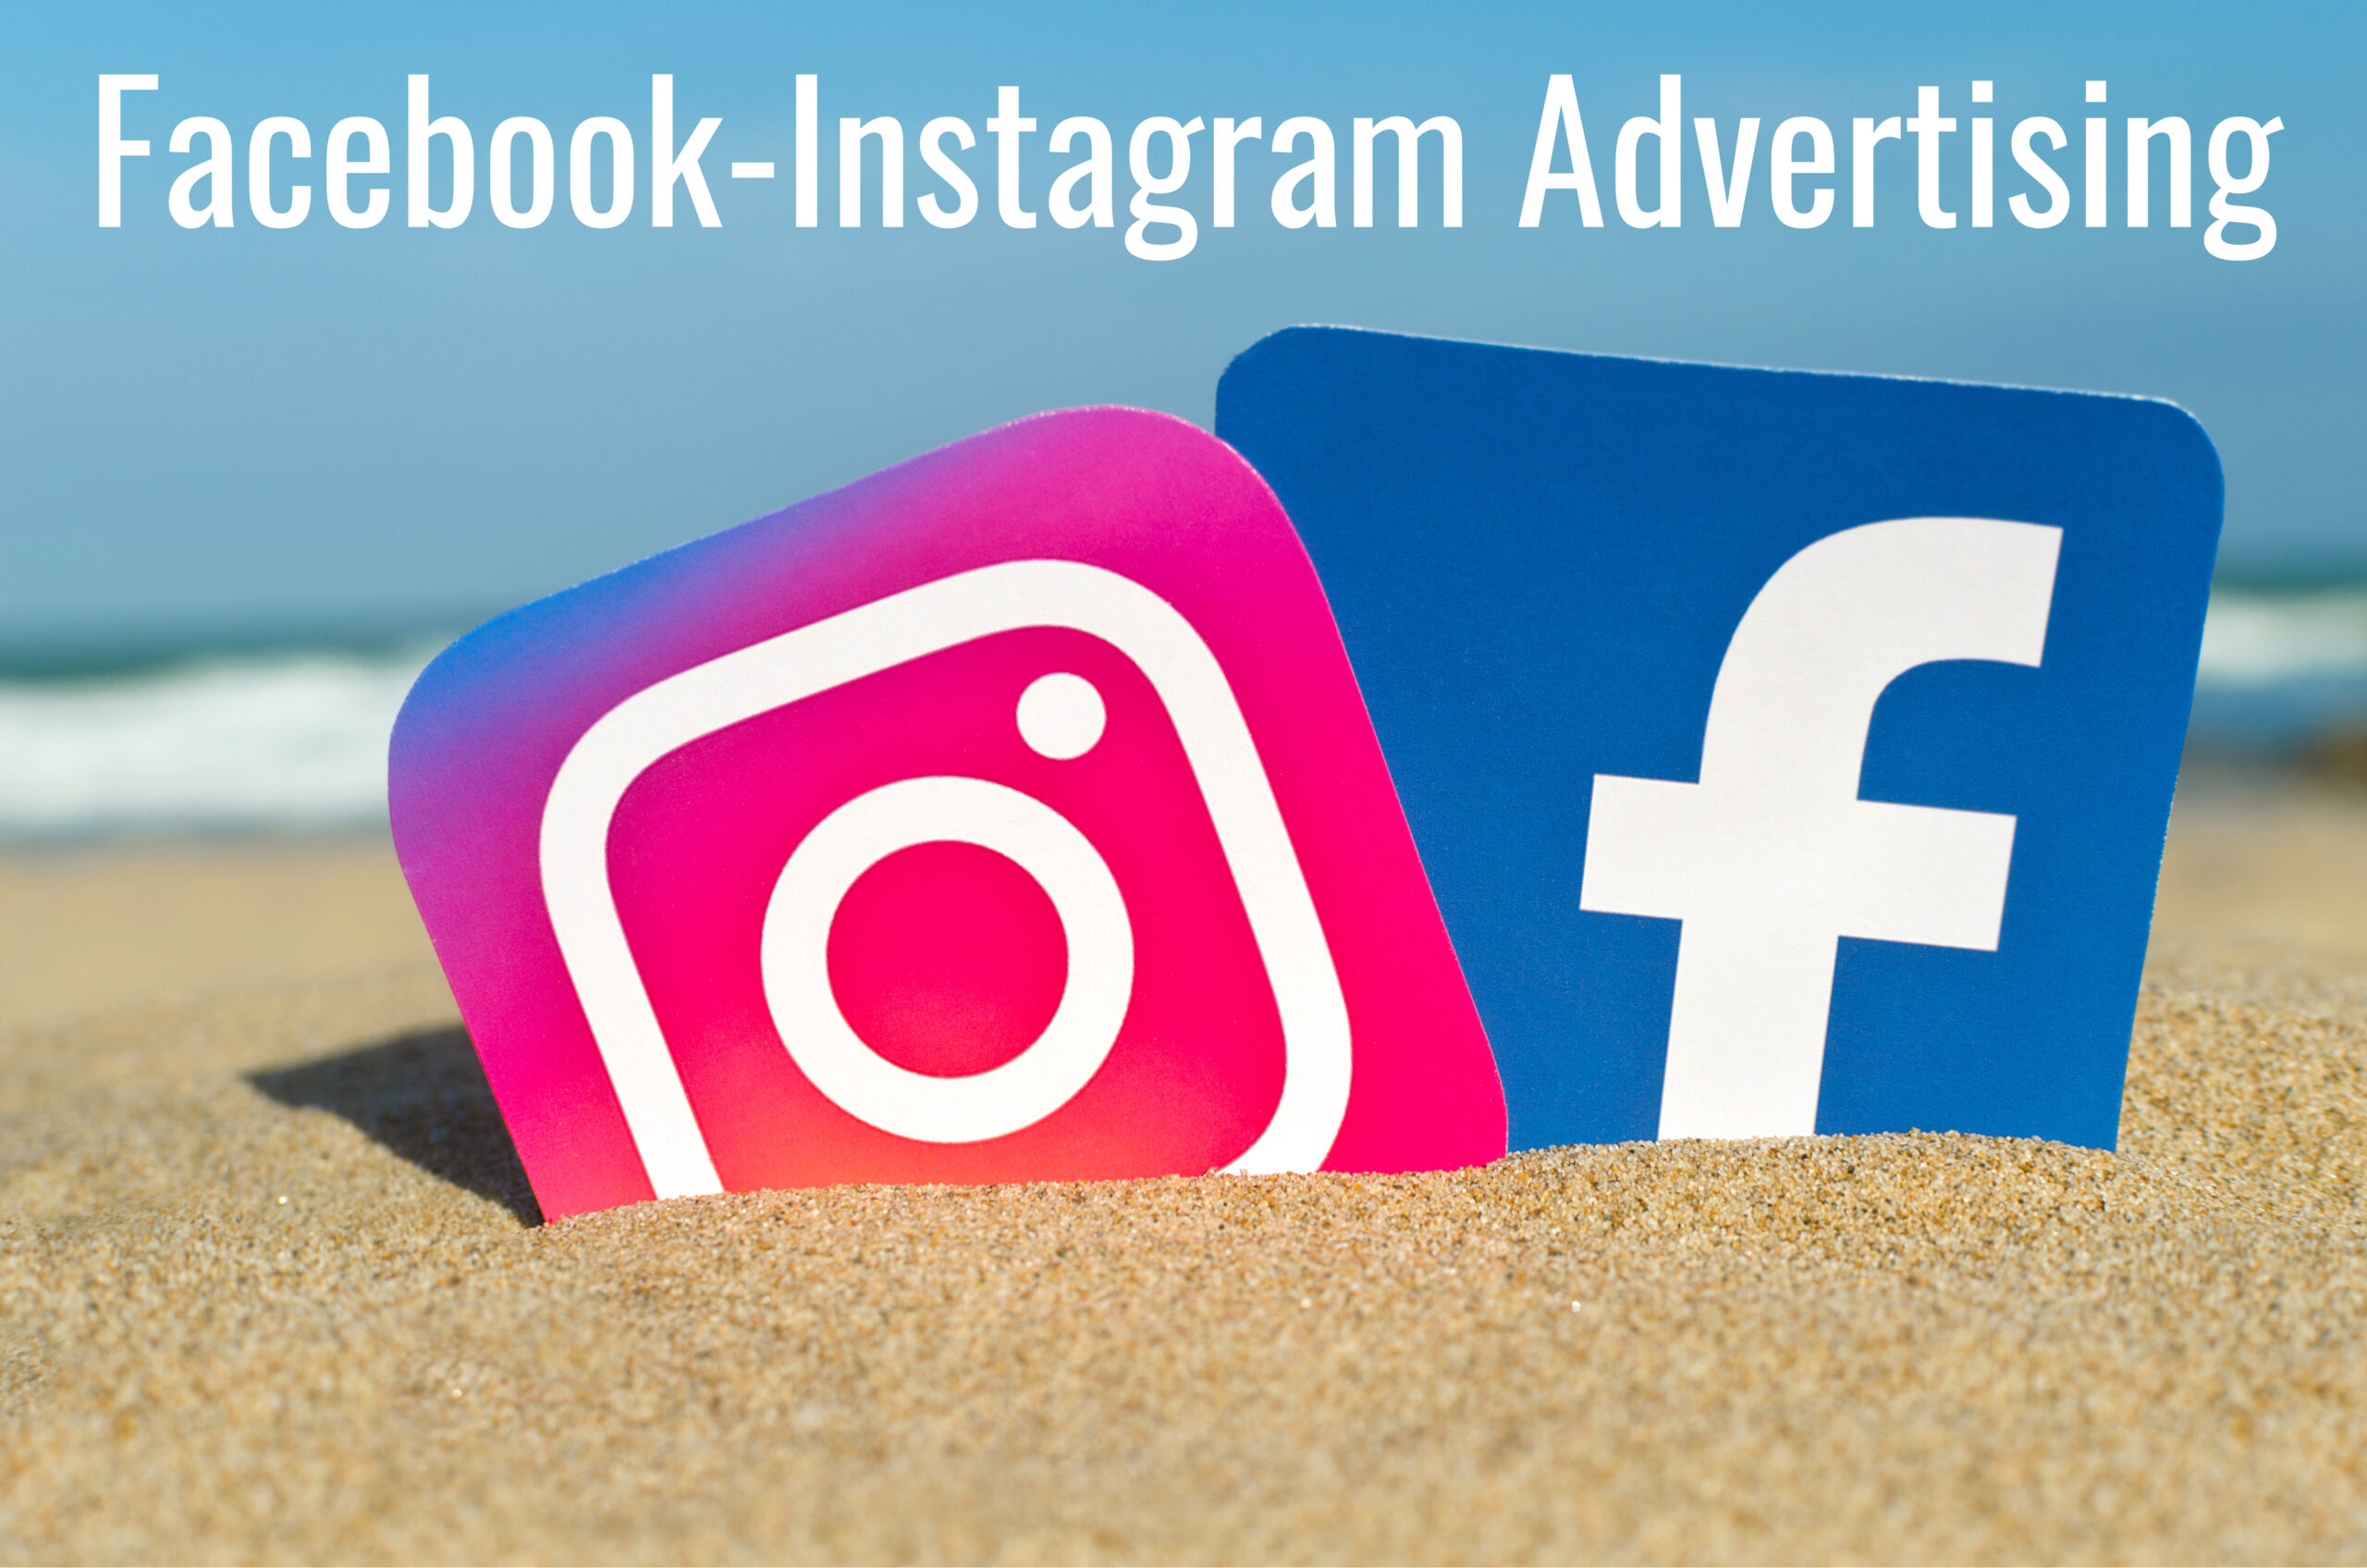 Why You Should Hire an Agency to Manage Your Company’s Ads on Facebook and Instagram